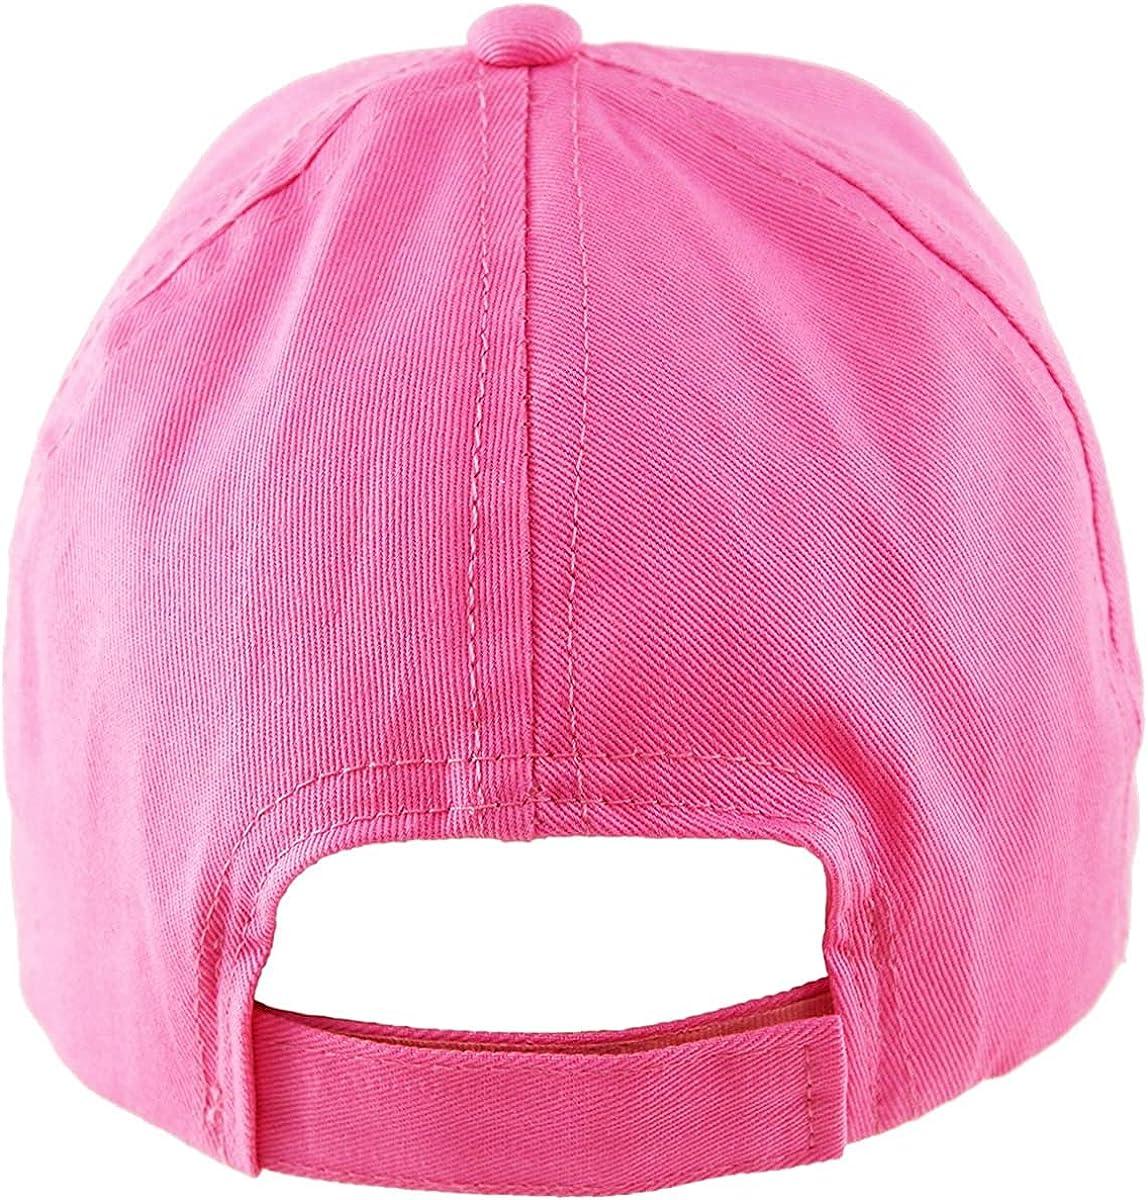 Minnie Mouse Baseball Cap, Toddler Girls, Age 2-4- Pink/White